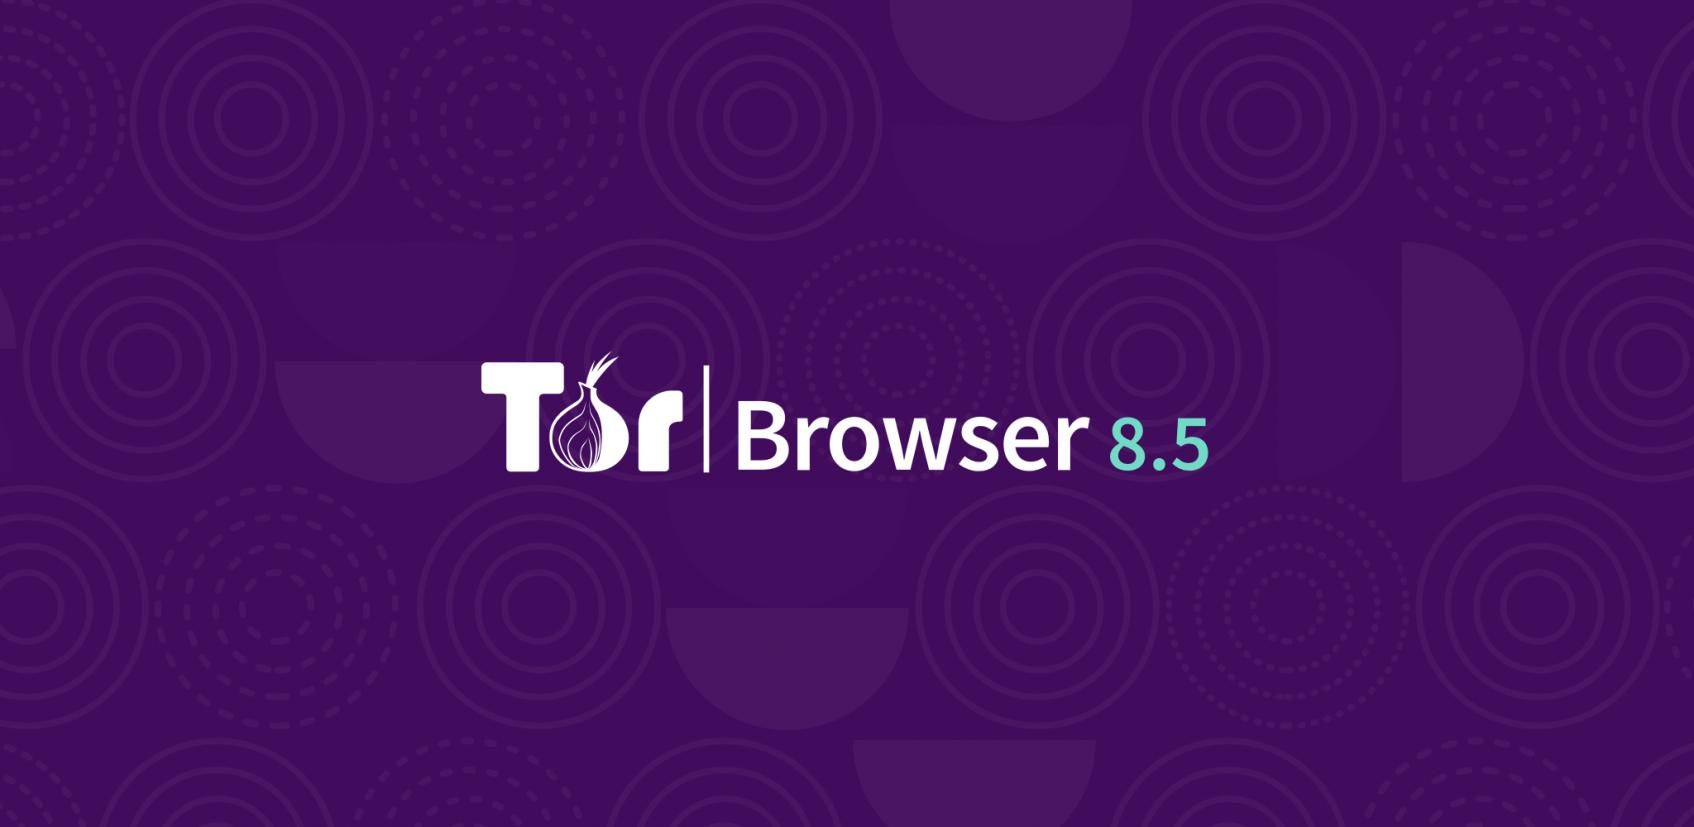 tor browser releases гирда